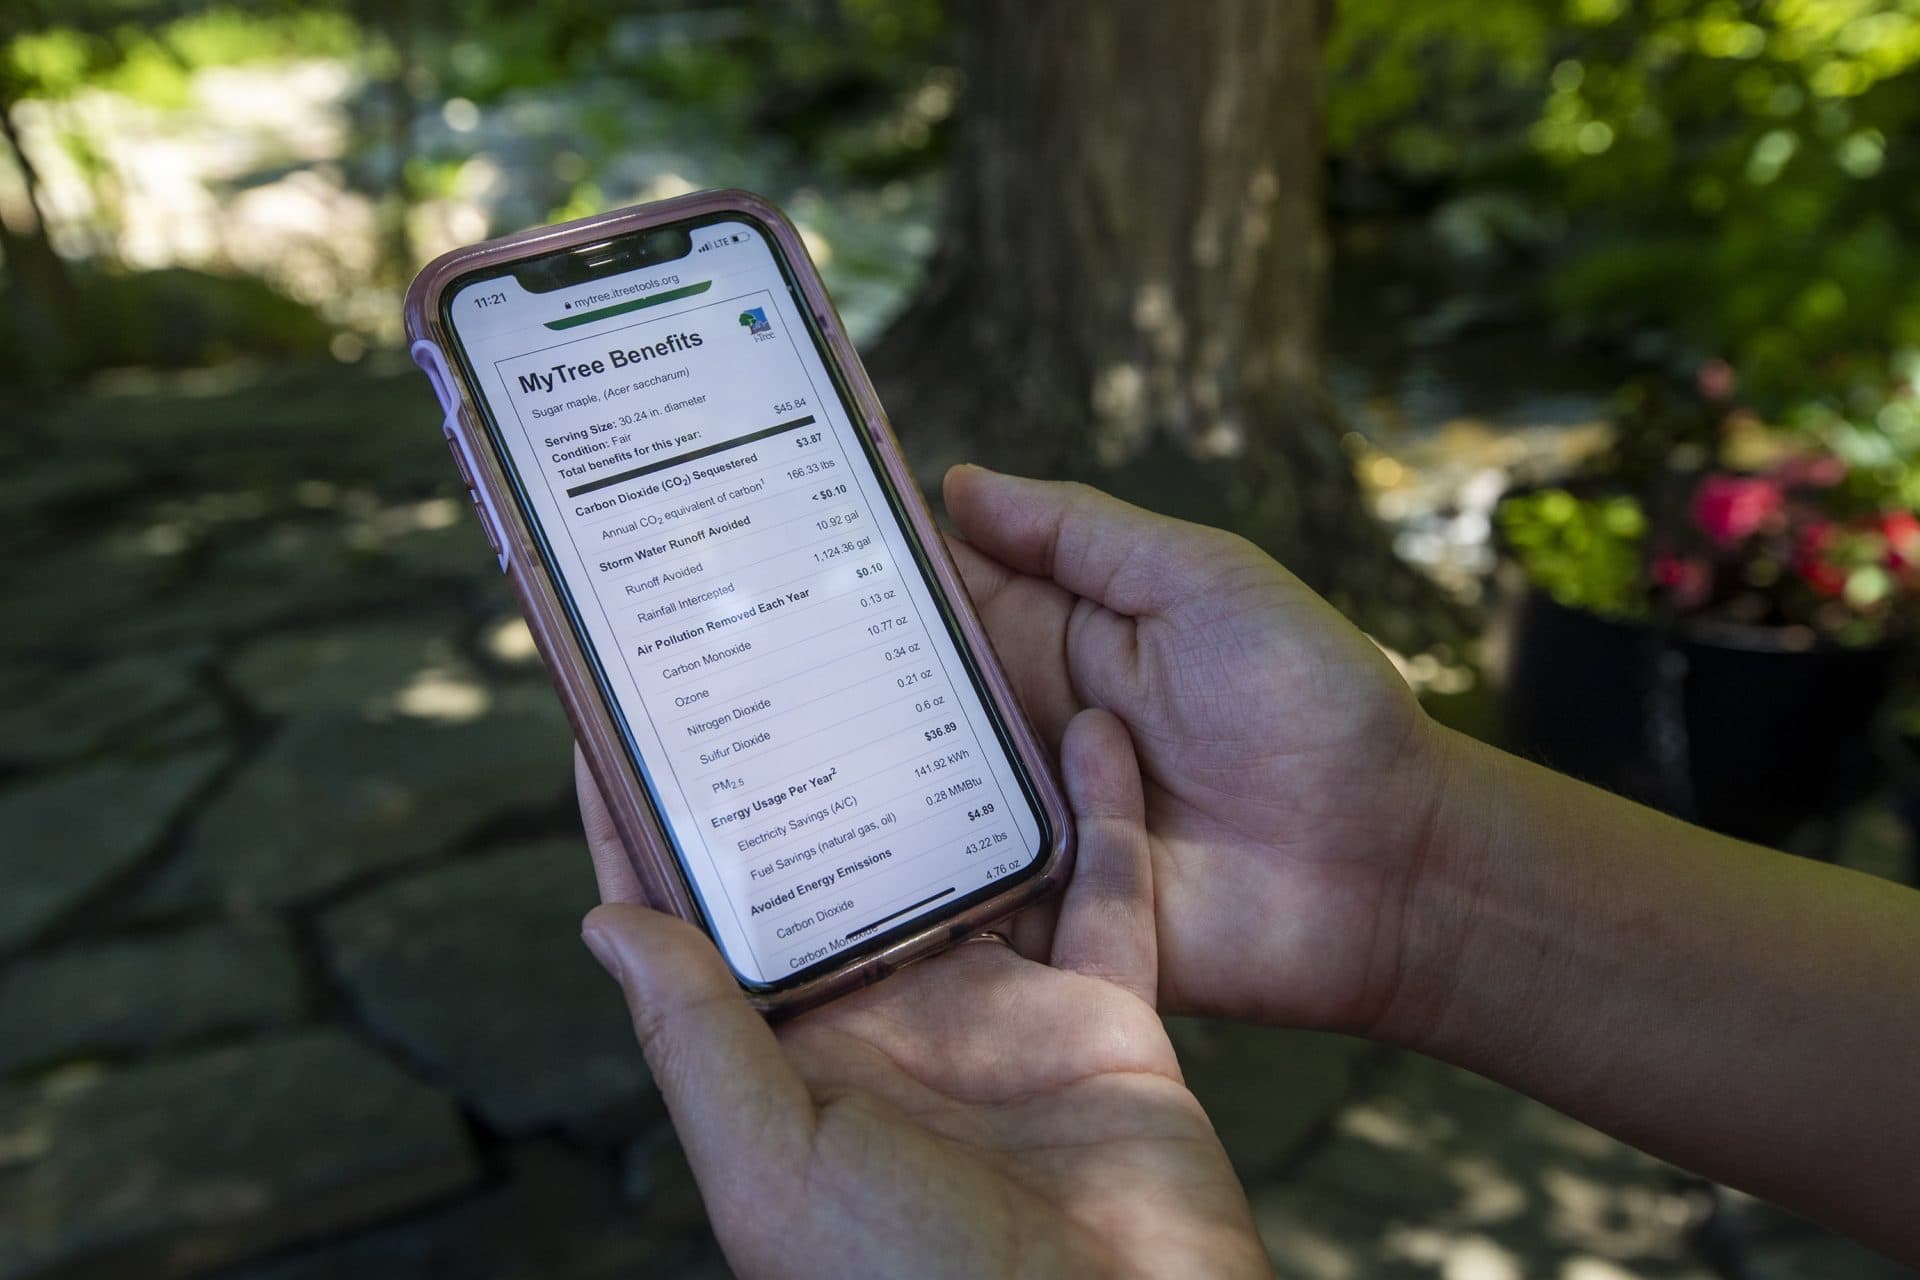 Dr. Danielle Ignace demonstrates how to use the iTree app, which calculates how an individual tree benefits the environment and its owners. (Jesse Costa/WBUR)